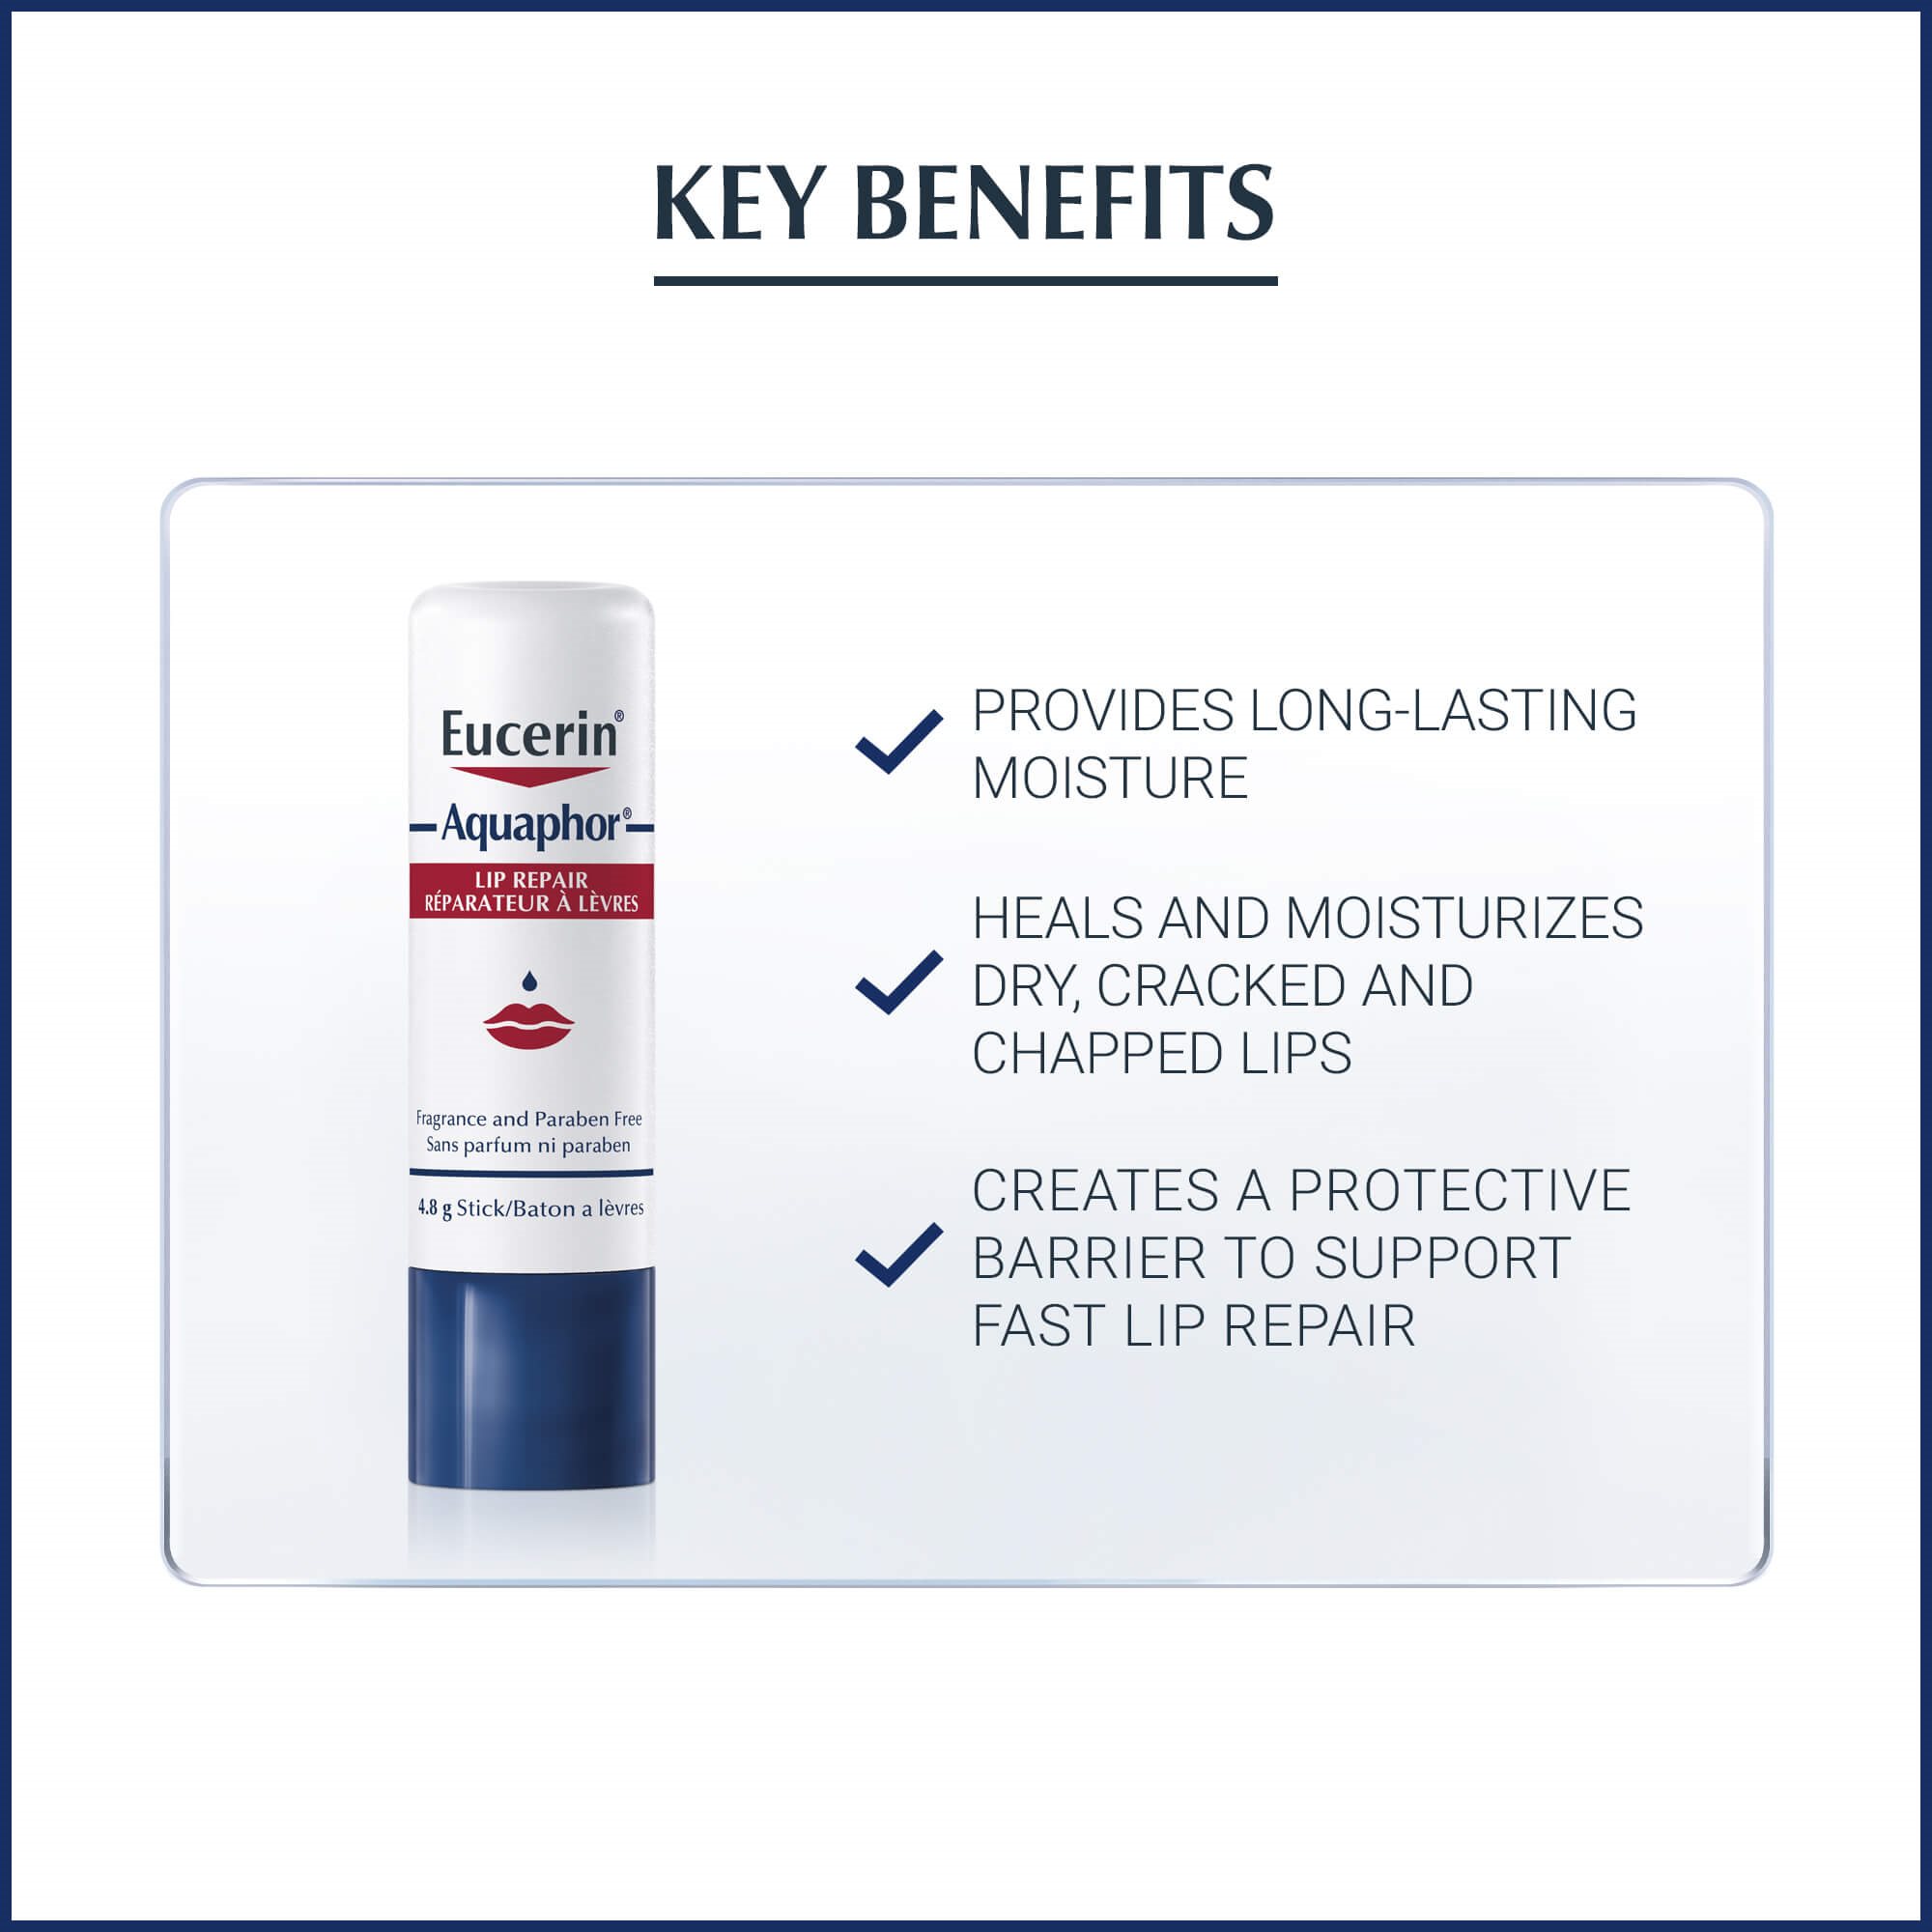 View of Aquaphor lip repair stick product on white background with key benefits listed.